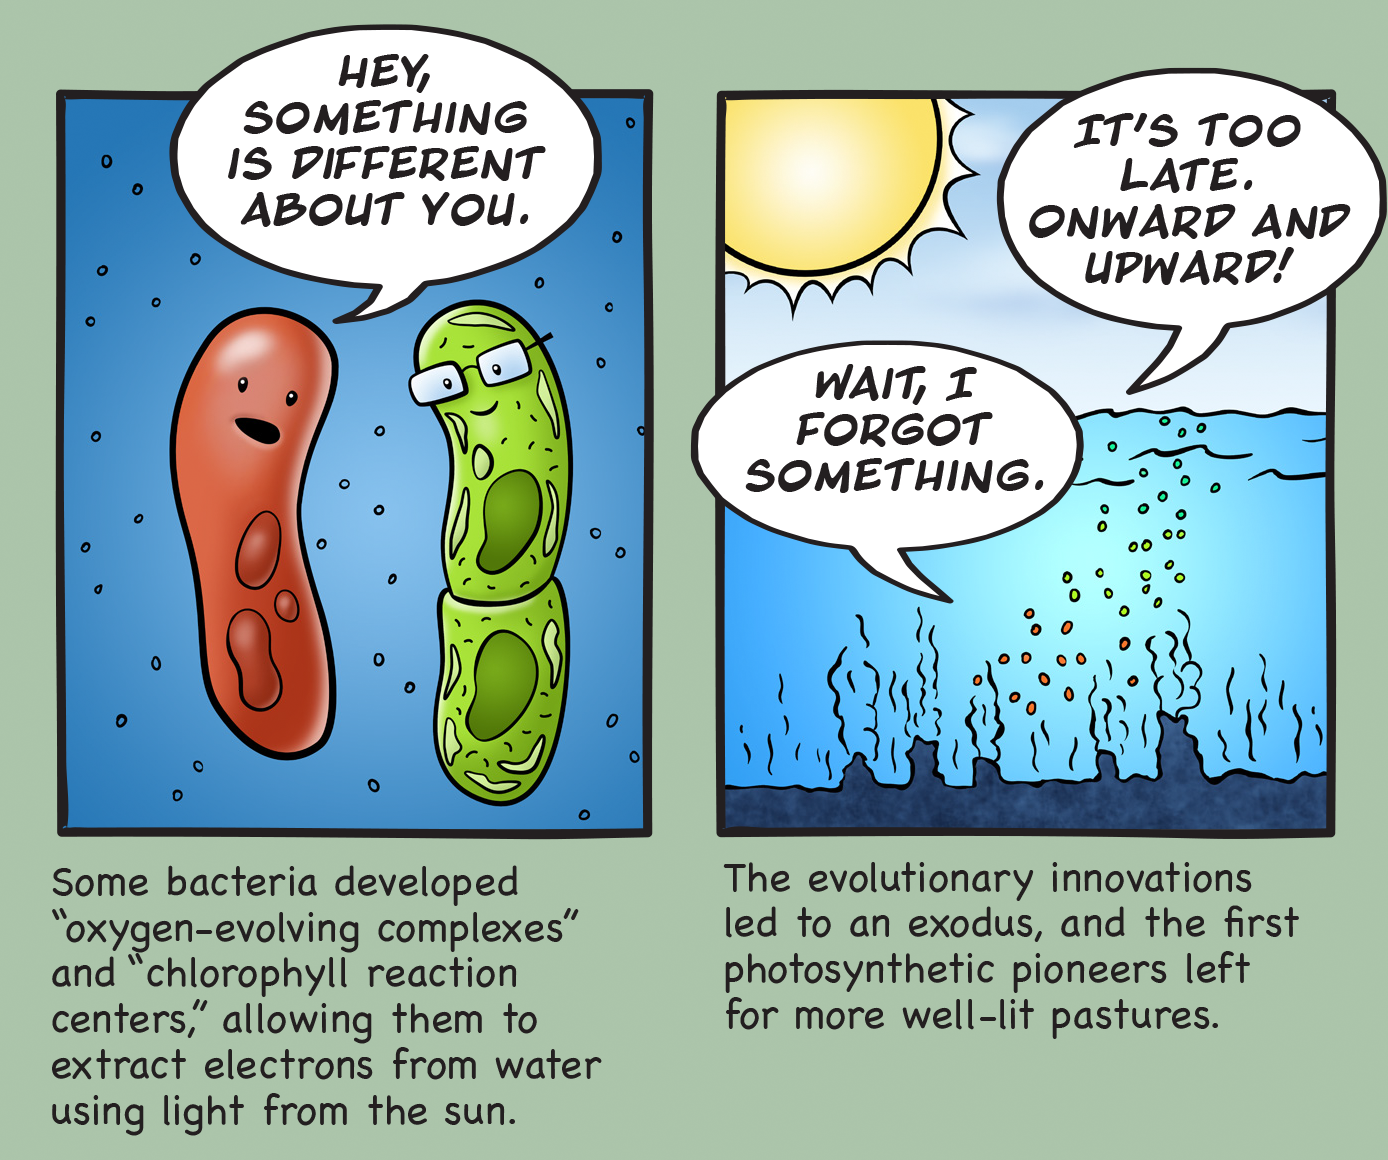 Some bacteria developed "oxygen-evolving complexes" and "chlorophyll reaction centers," allowing them to extract electrons from water using light from the sun. The evolutionary innovations led to an exodus, and the first photosynthetic pioneers left for more well-lit pastures.